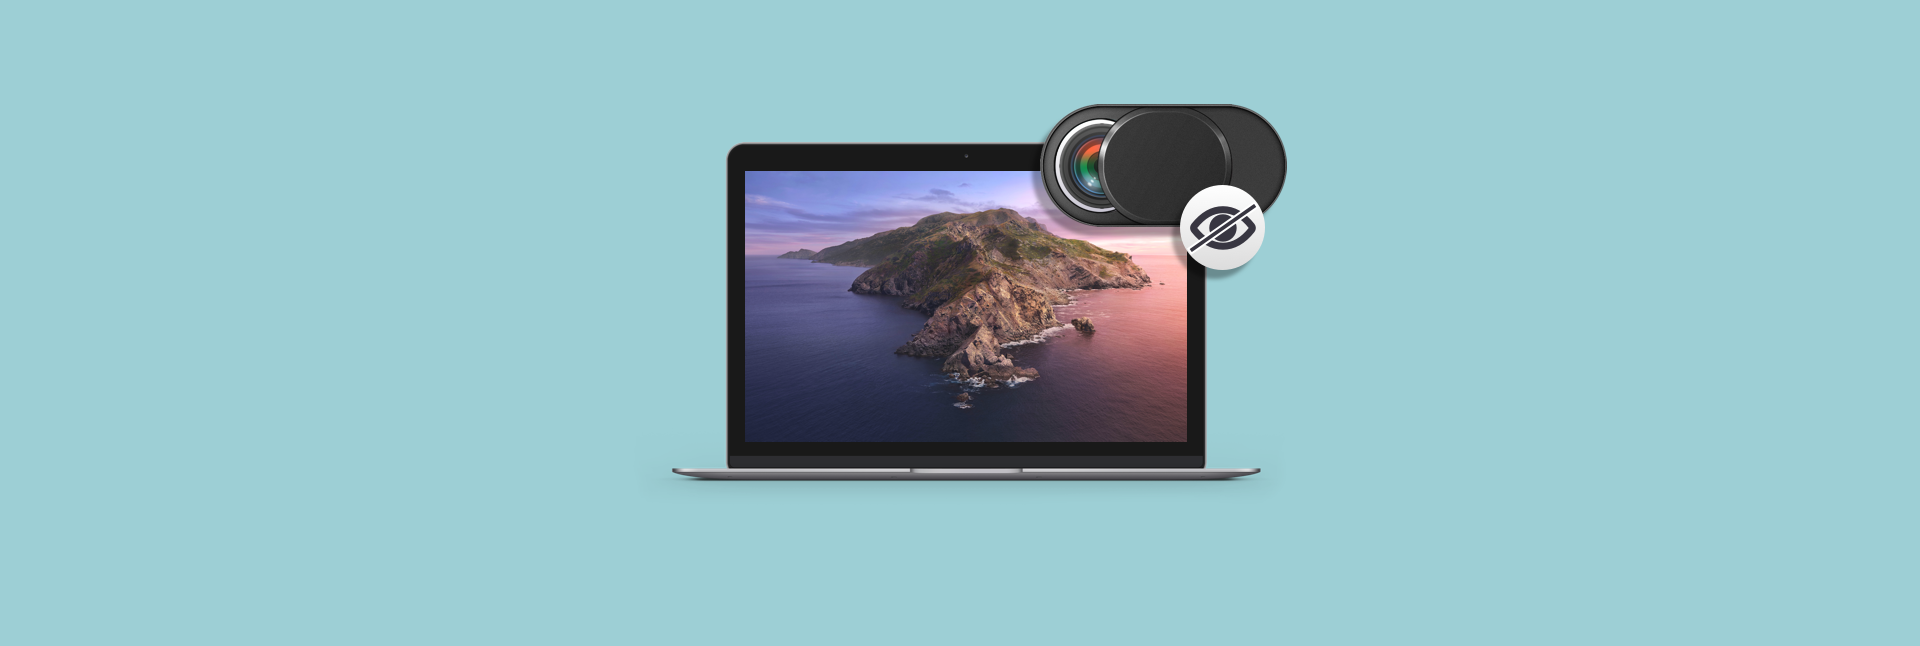 How to know if my mac camera is hacked